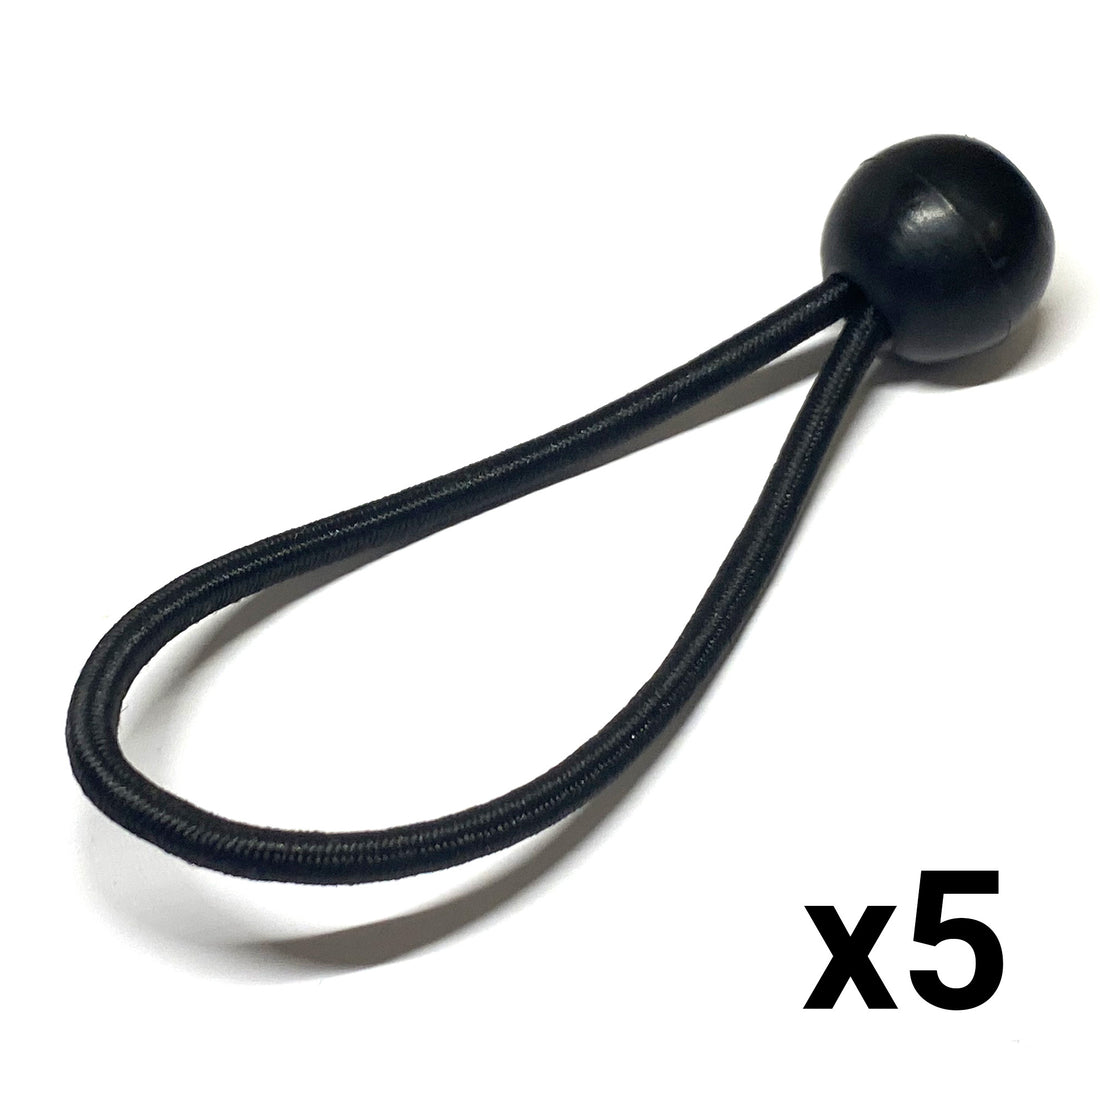 SPARE PART - BUNGEES - Black 120mm - 5 pack